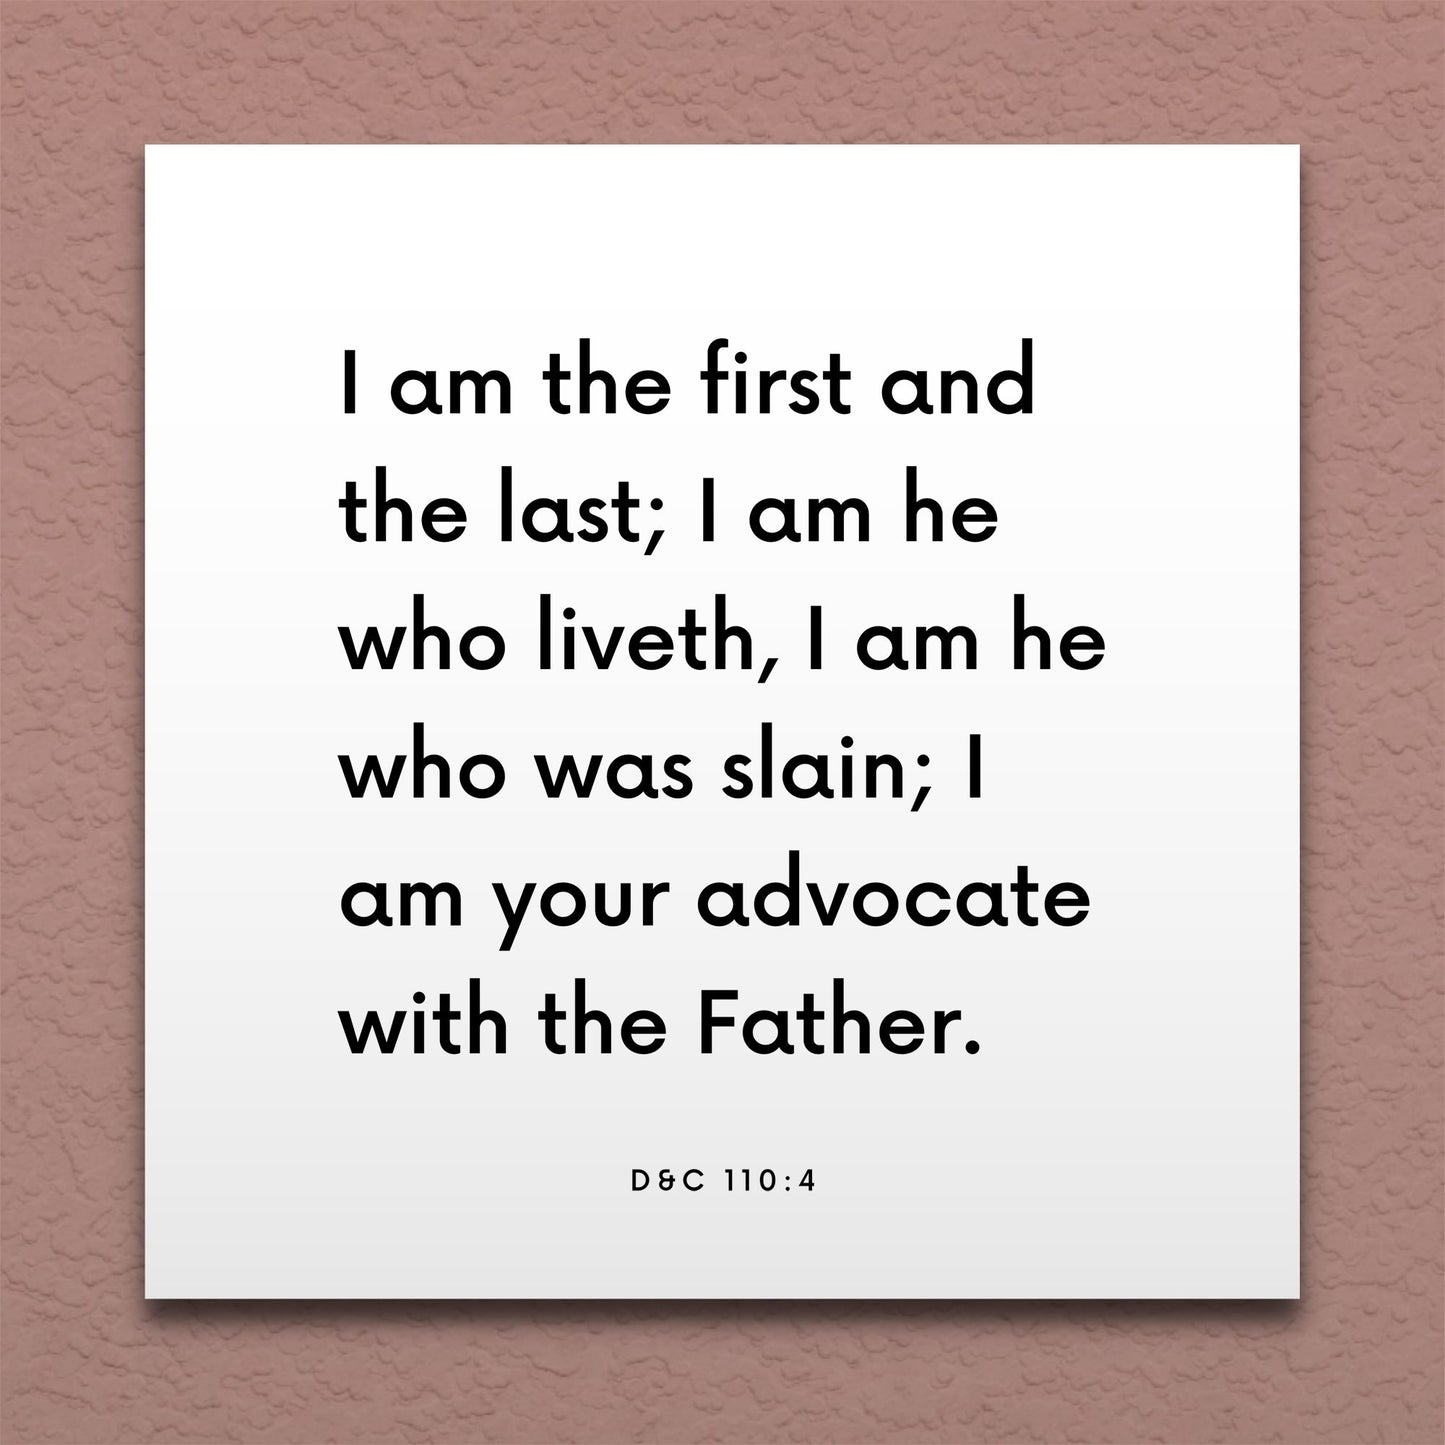 Wall-mounted scripture tile for D&C 110:4 - "I am your advocate with the Father"